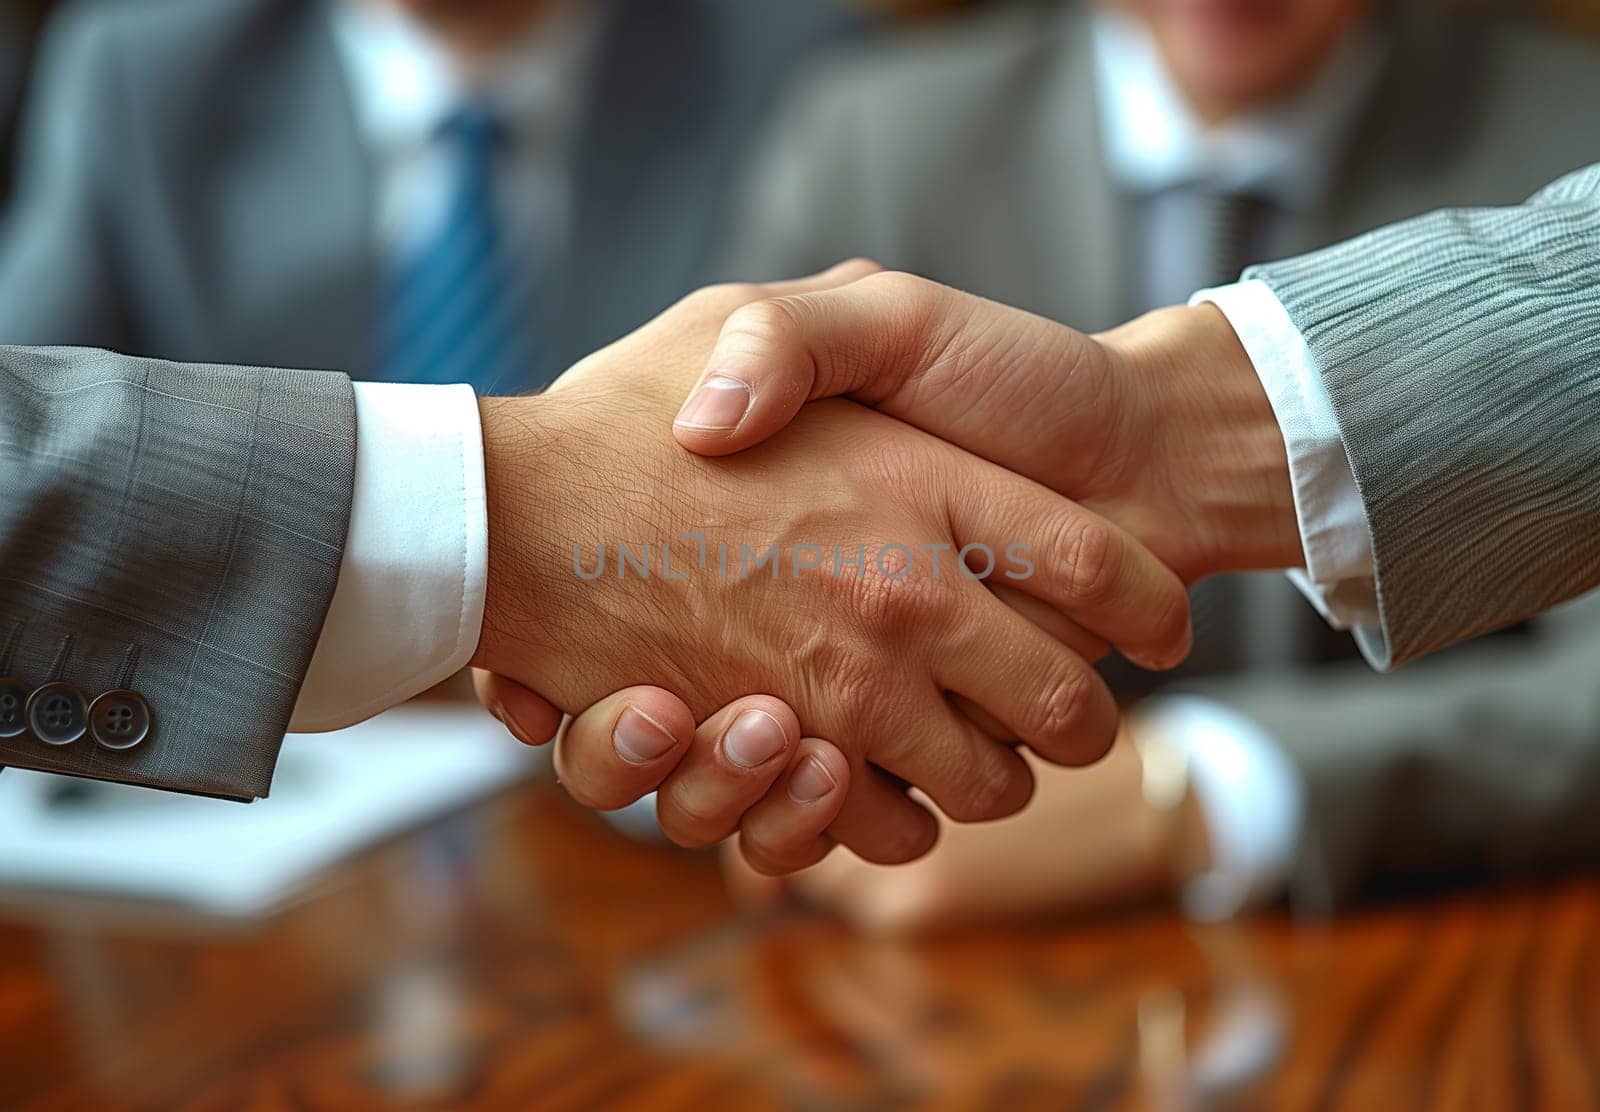 Men in formal wear sharing a gesture with handshakes over a table by richwolf